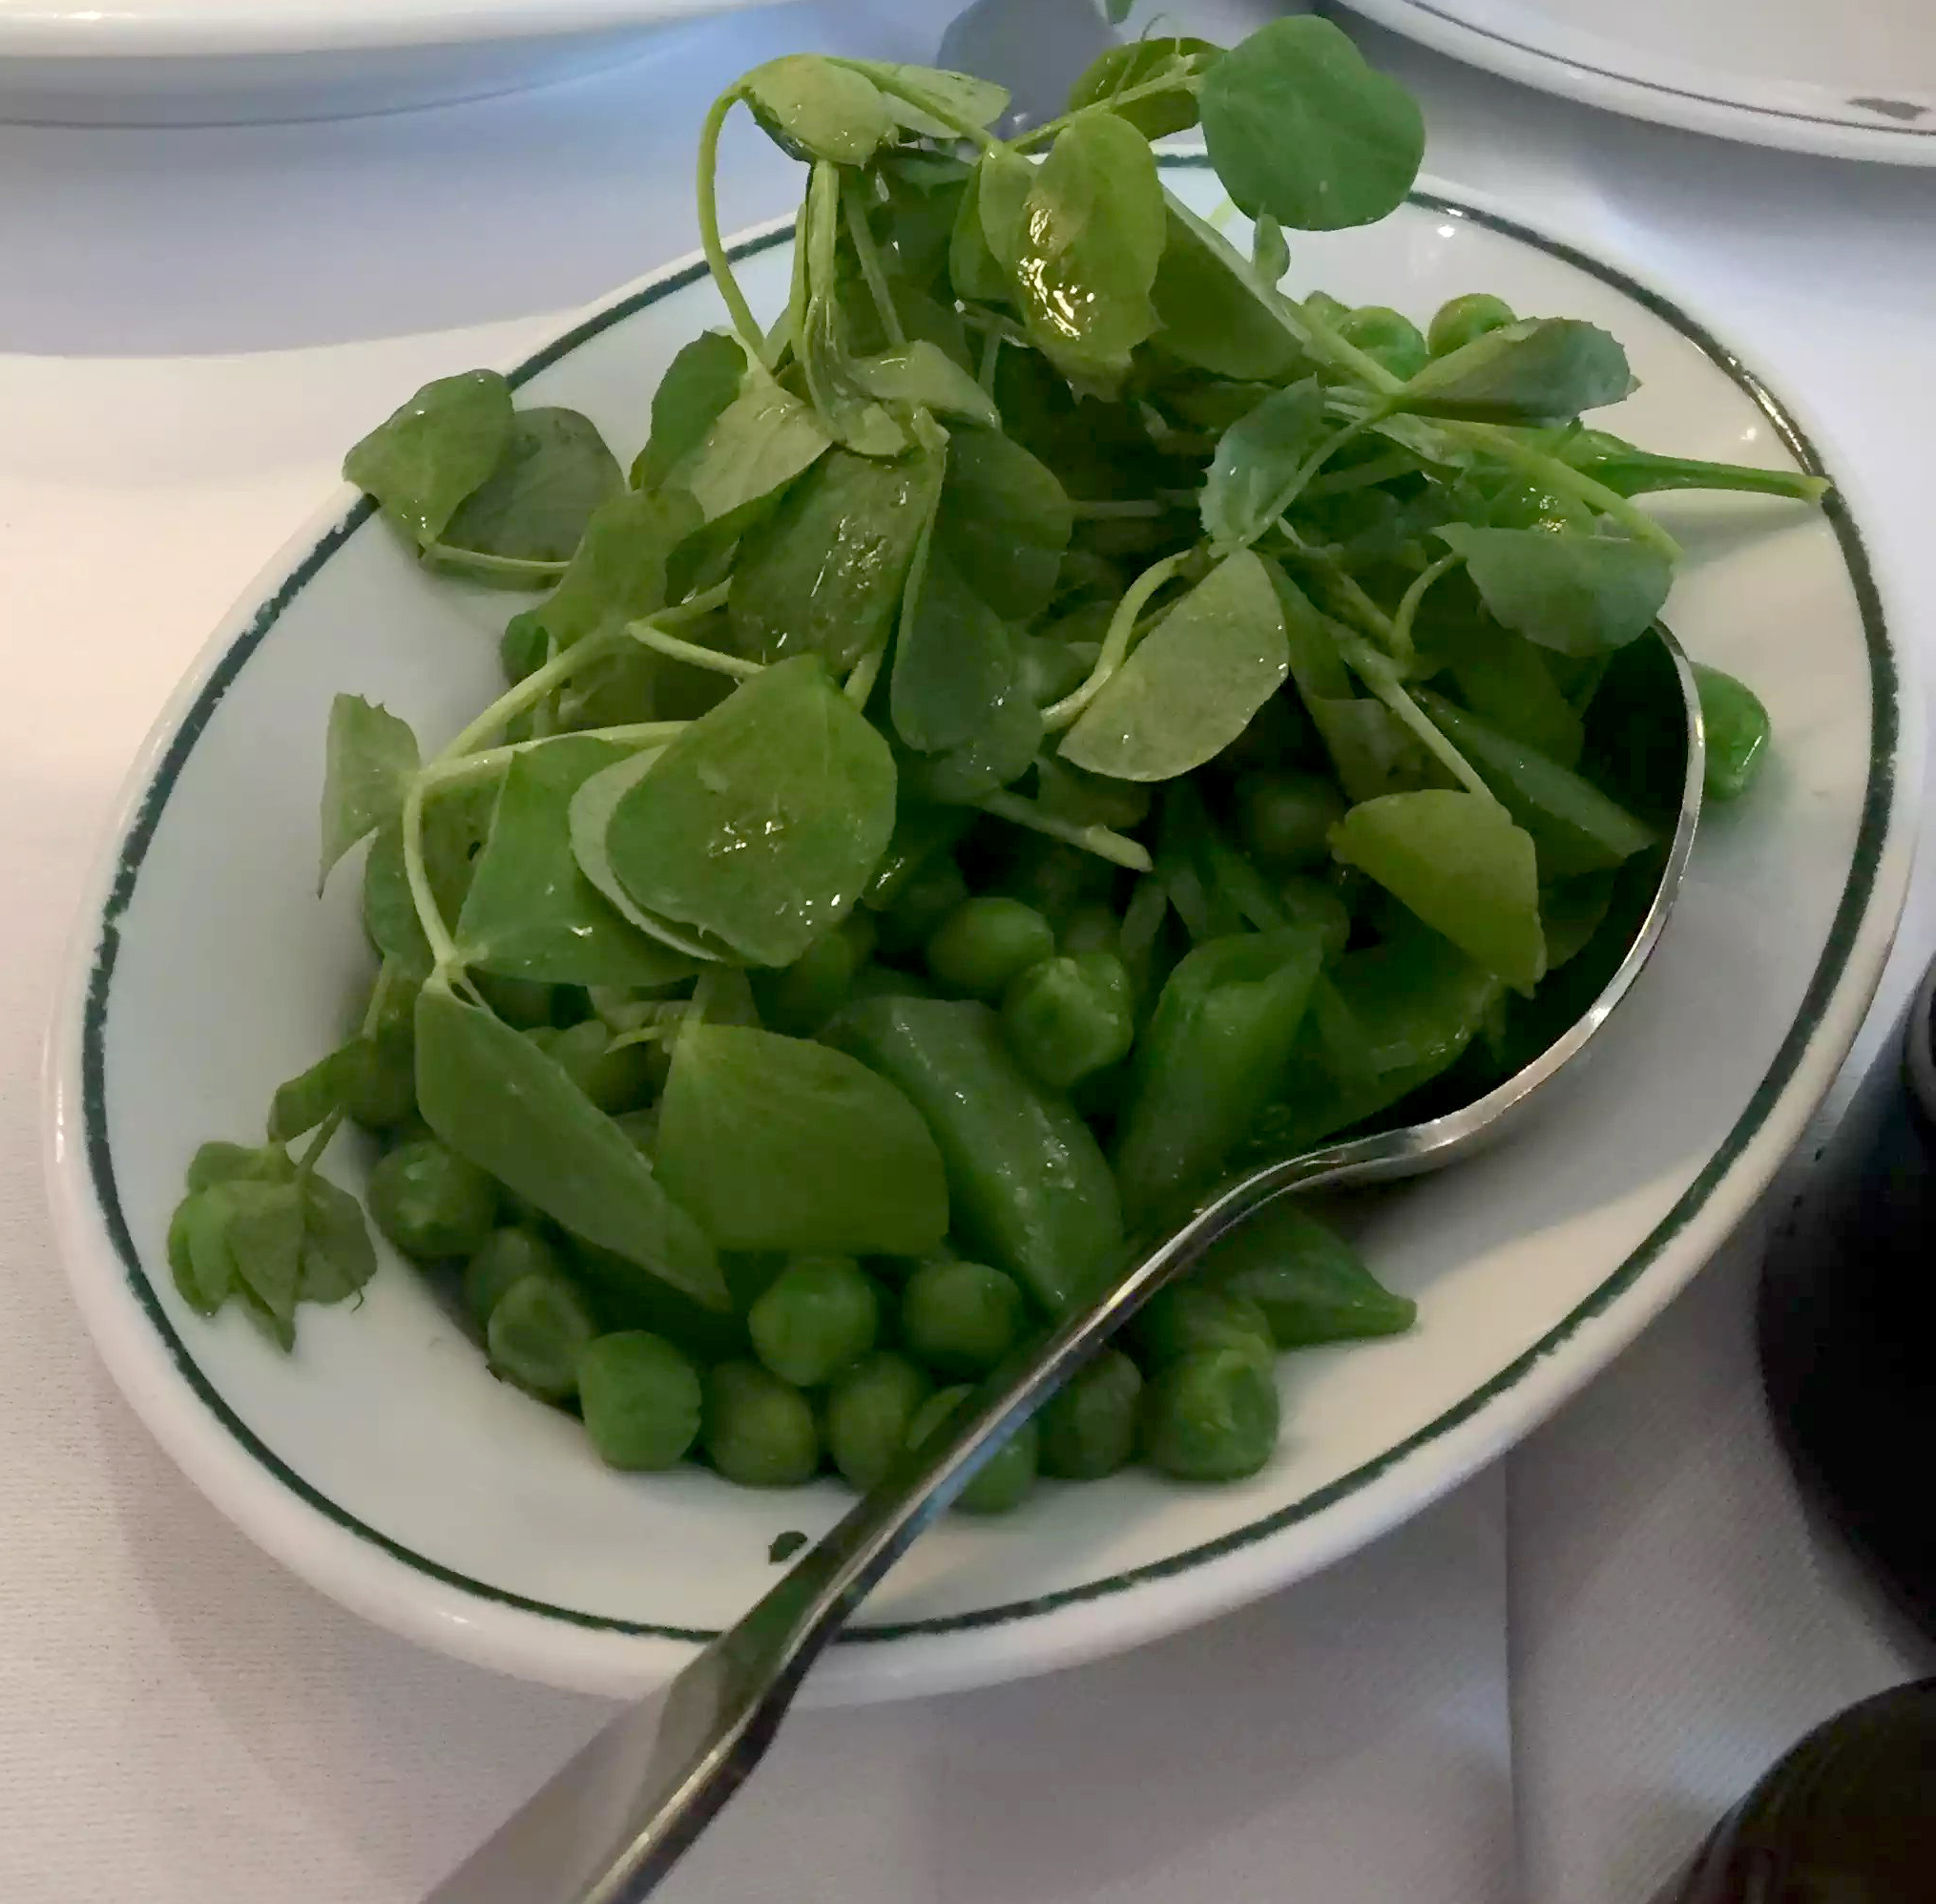 Ivy Cafe Restaurant Review Marylebone London Lunch Peas Sugar Snap Shoots